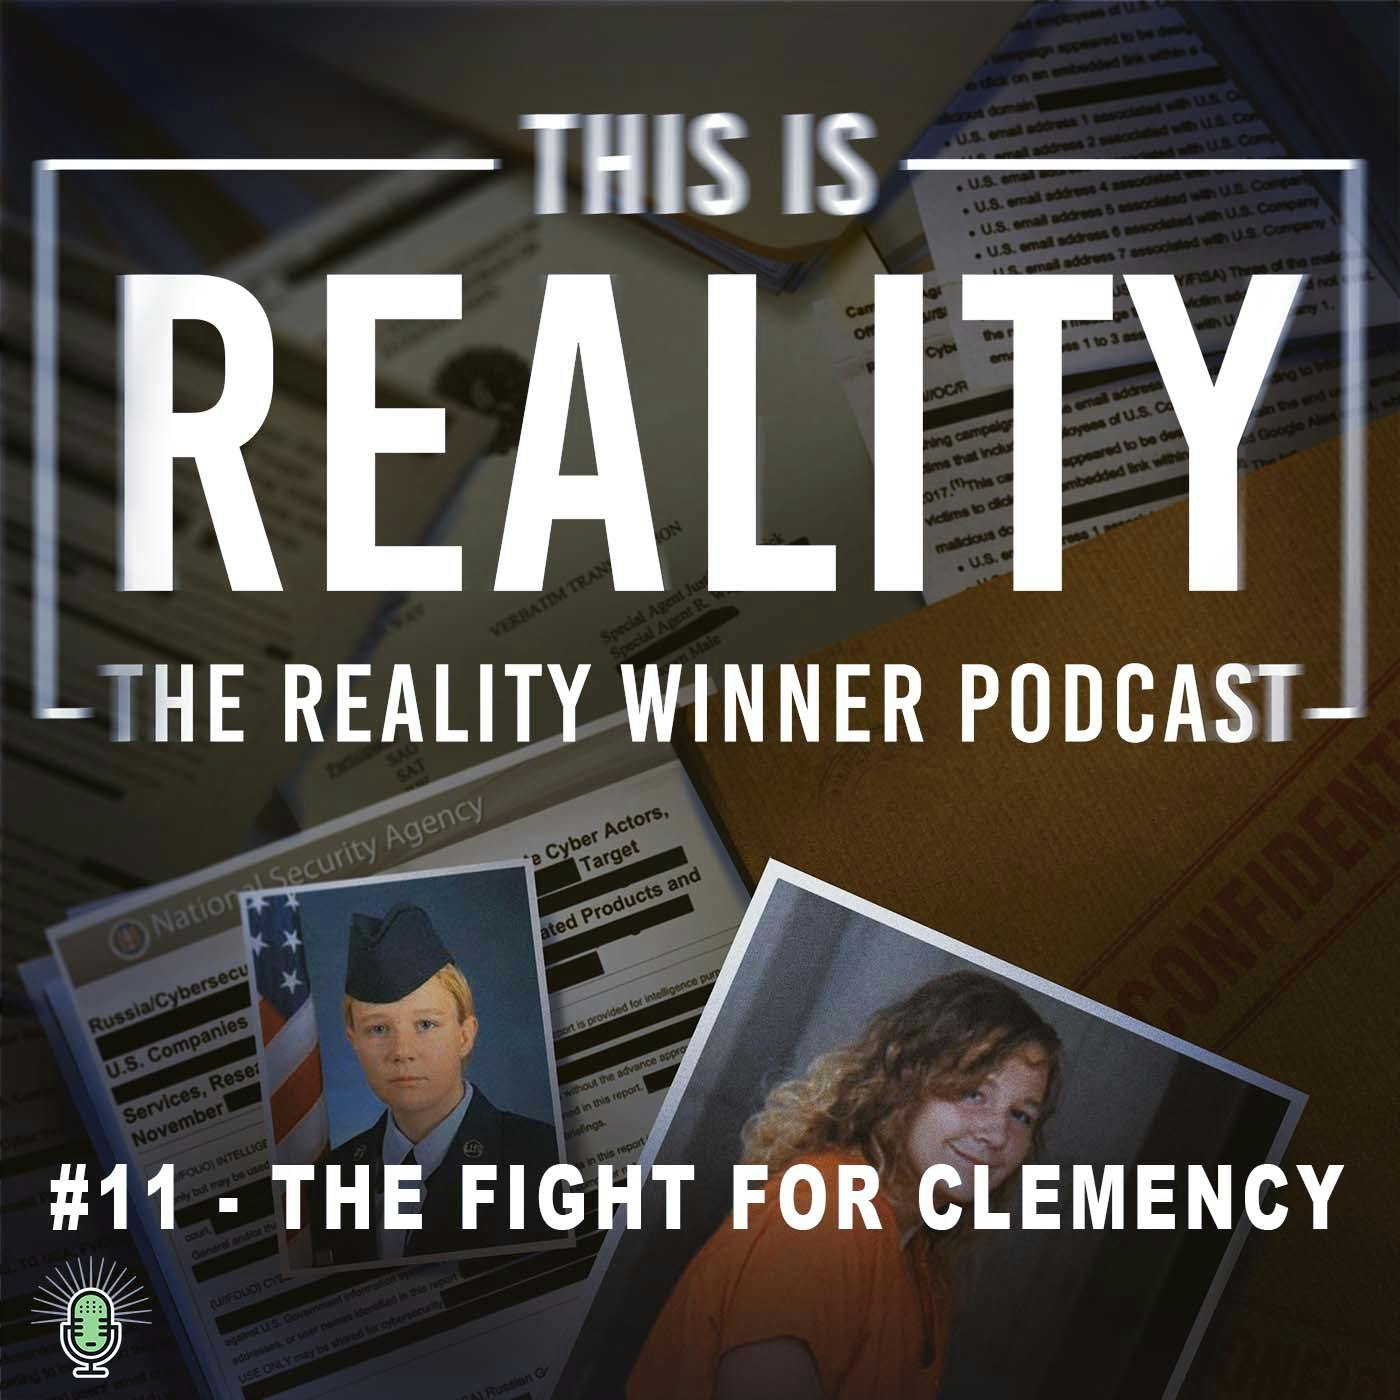 #11 - The Fight for Clemency